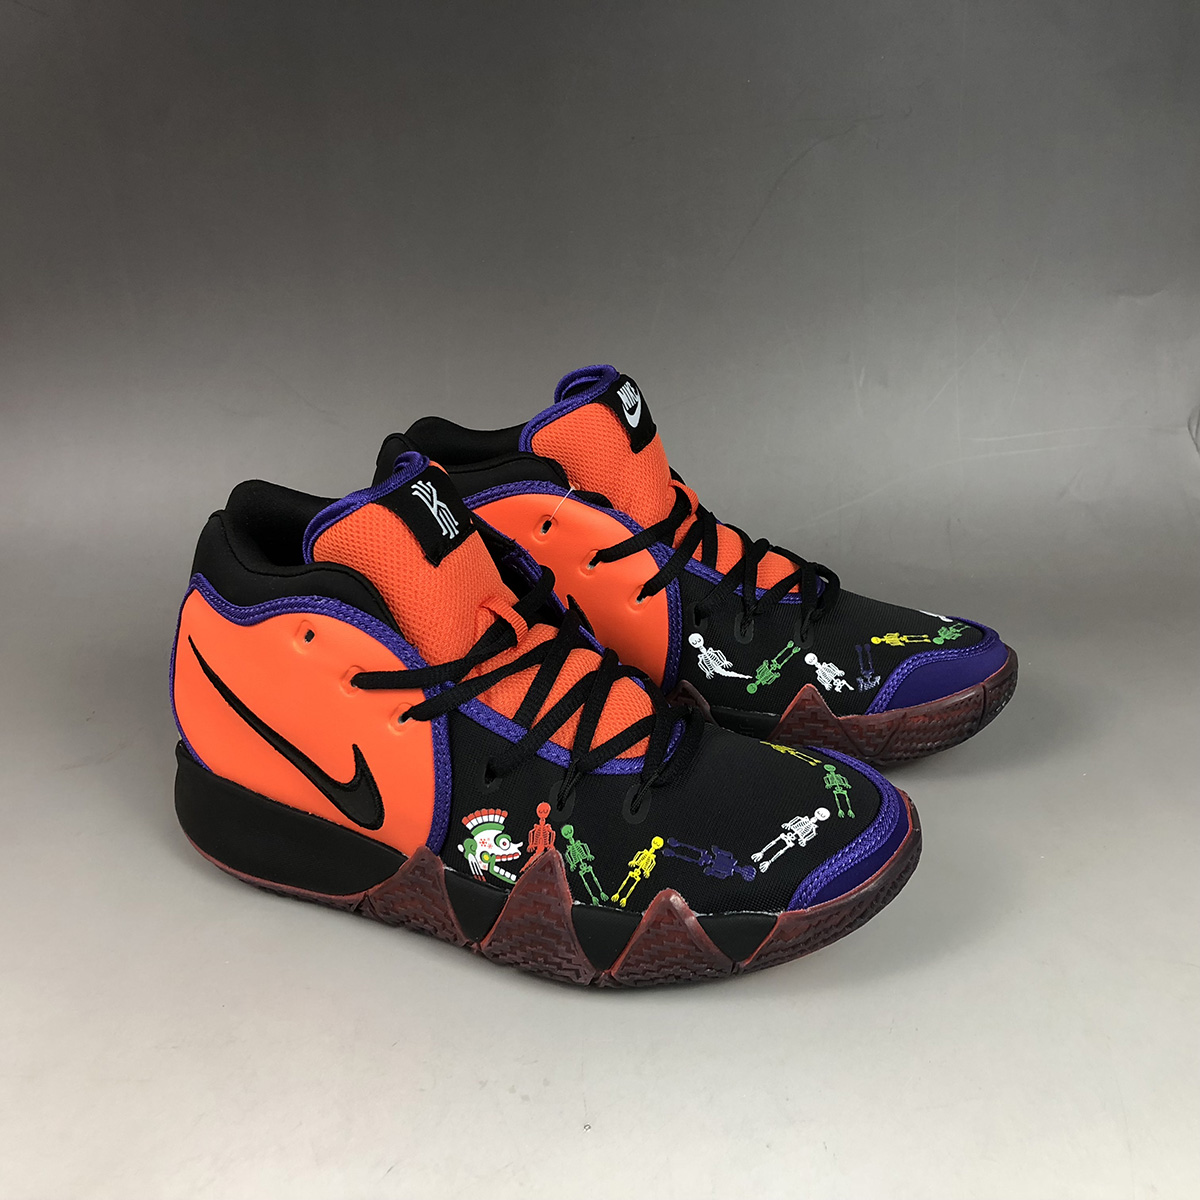 kyrie 4 day of the dead